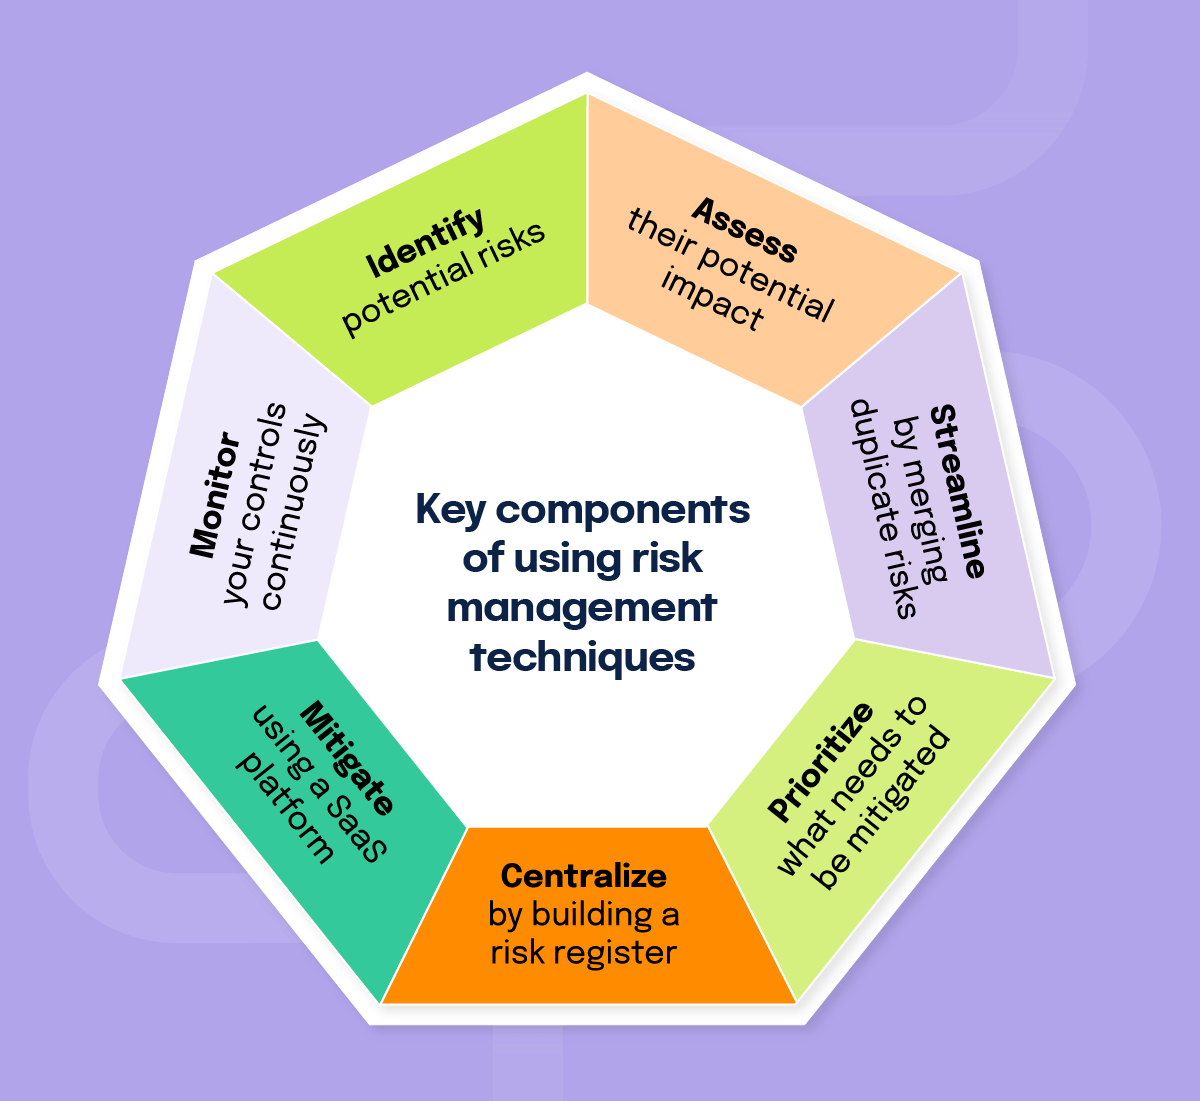 Identify, assess, streamline, prioritize, centralize, mitigate, and monitor are key components of using risk management techniques